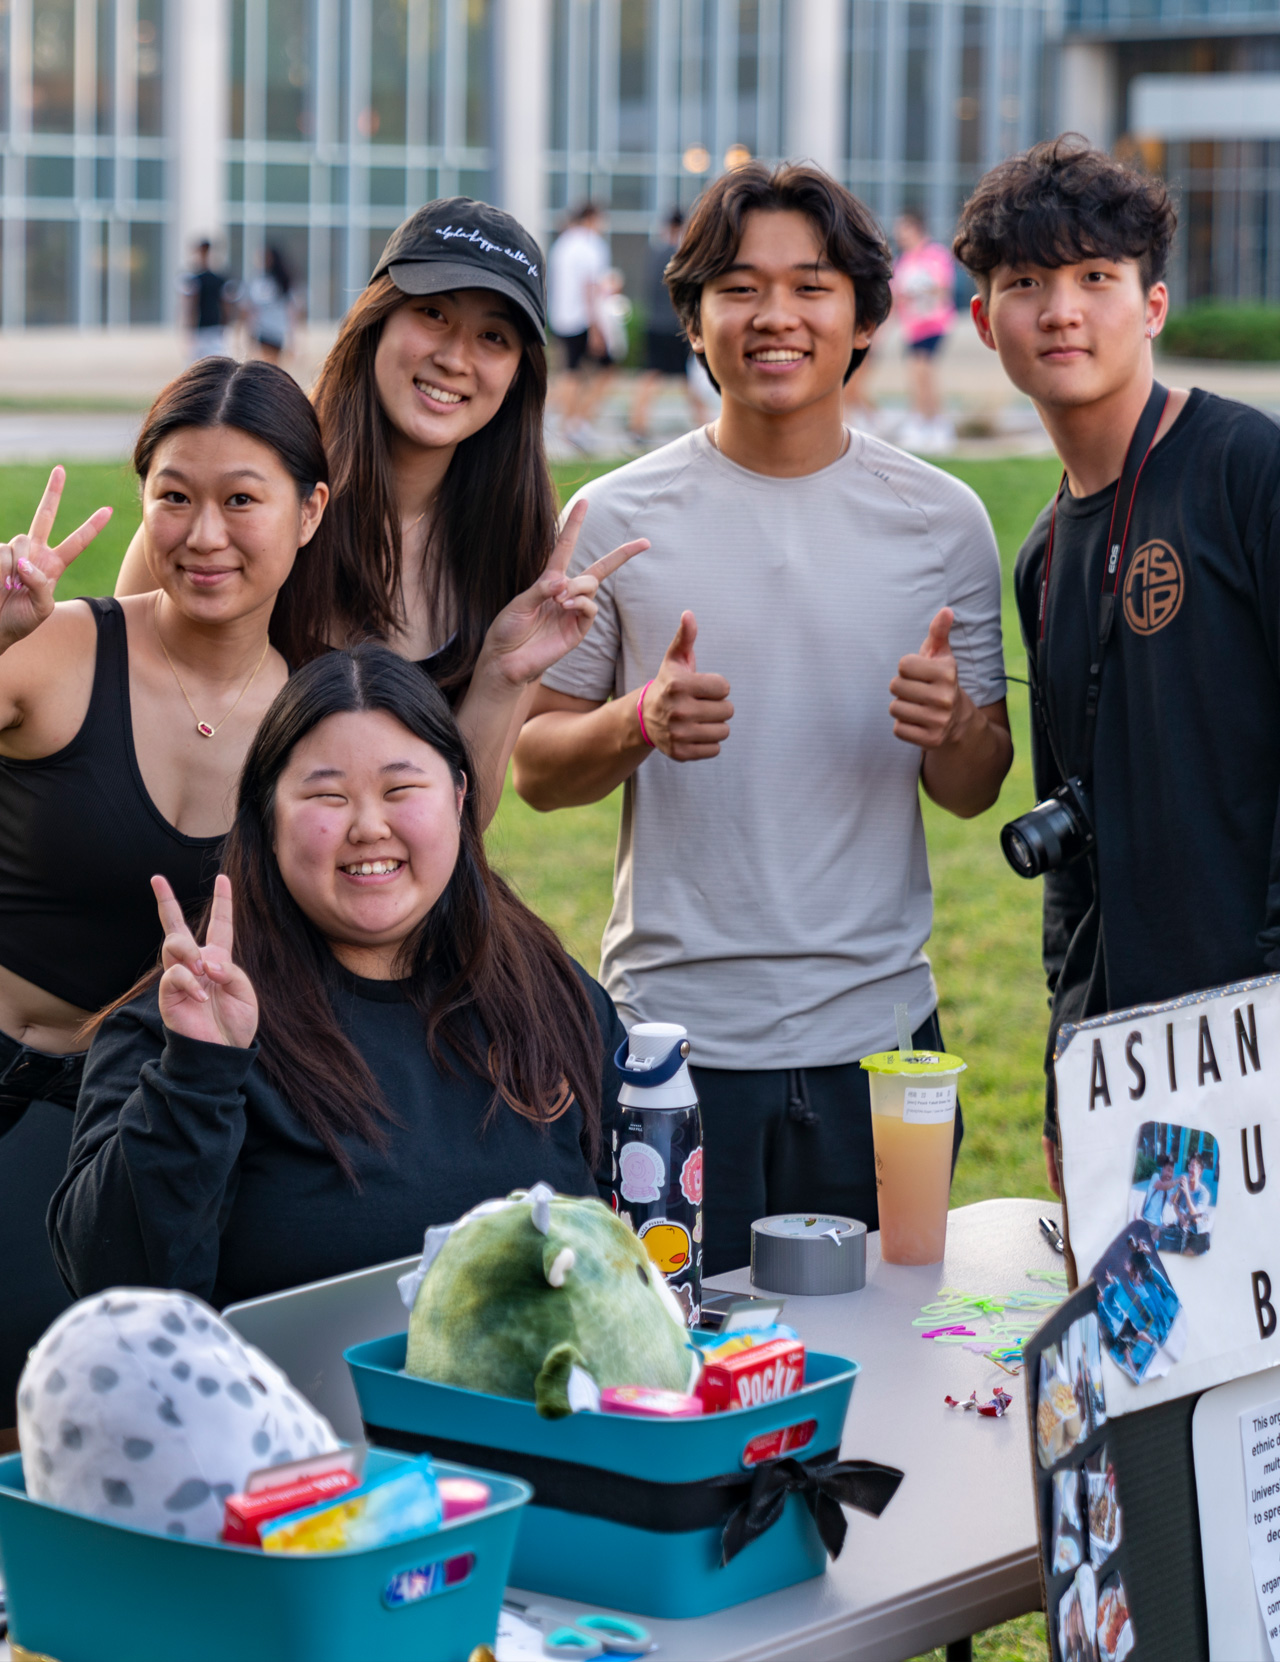 A group of students at a table for the Asian Student Union Board.